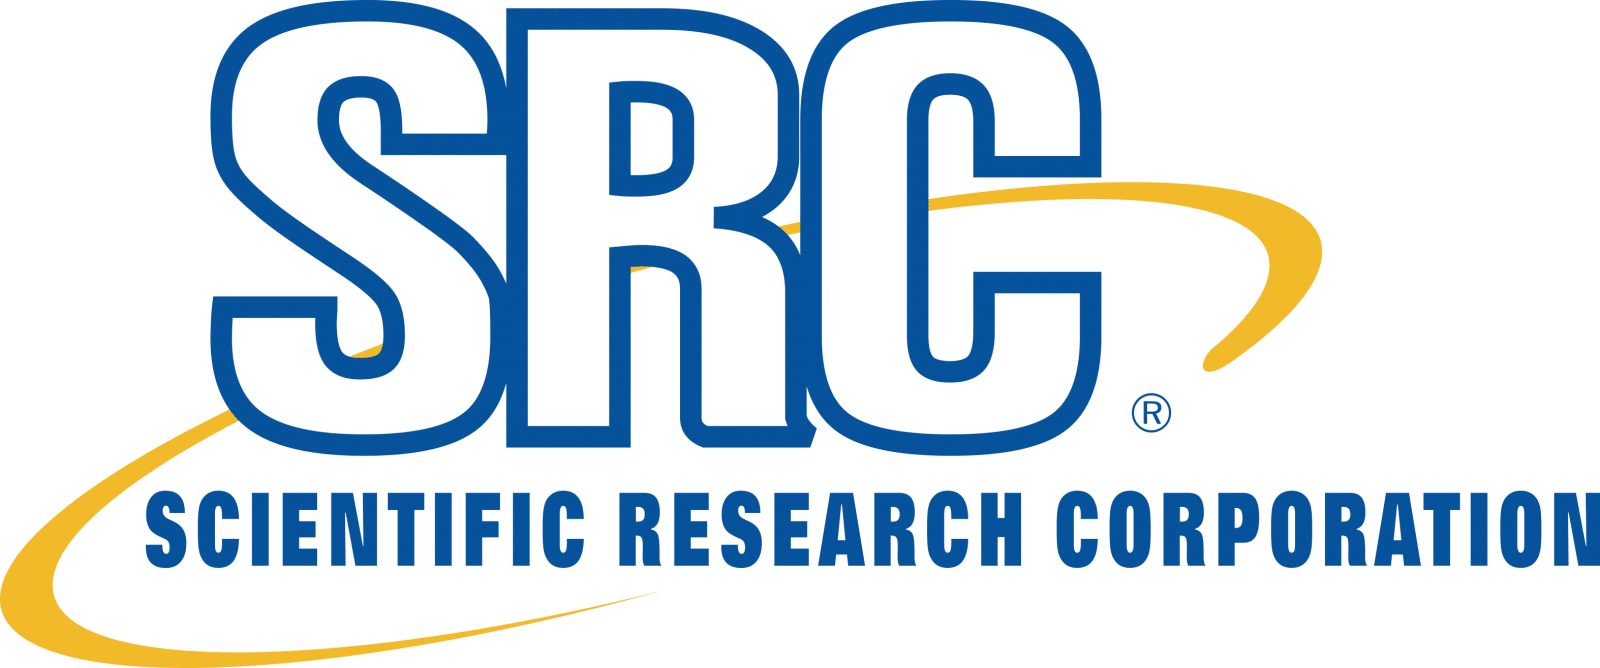 research and development corporation